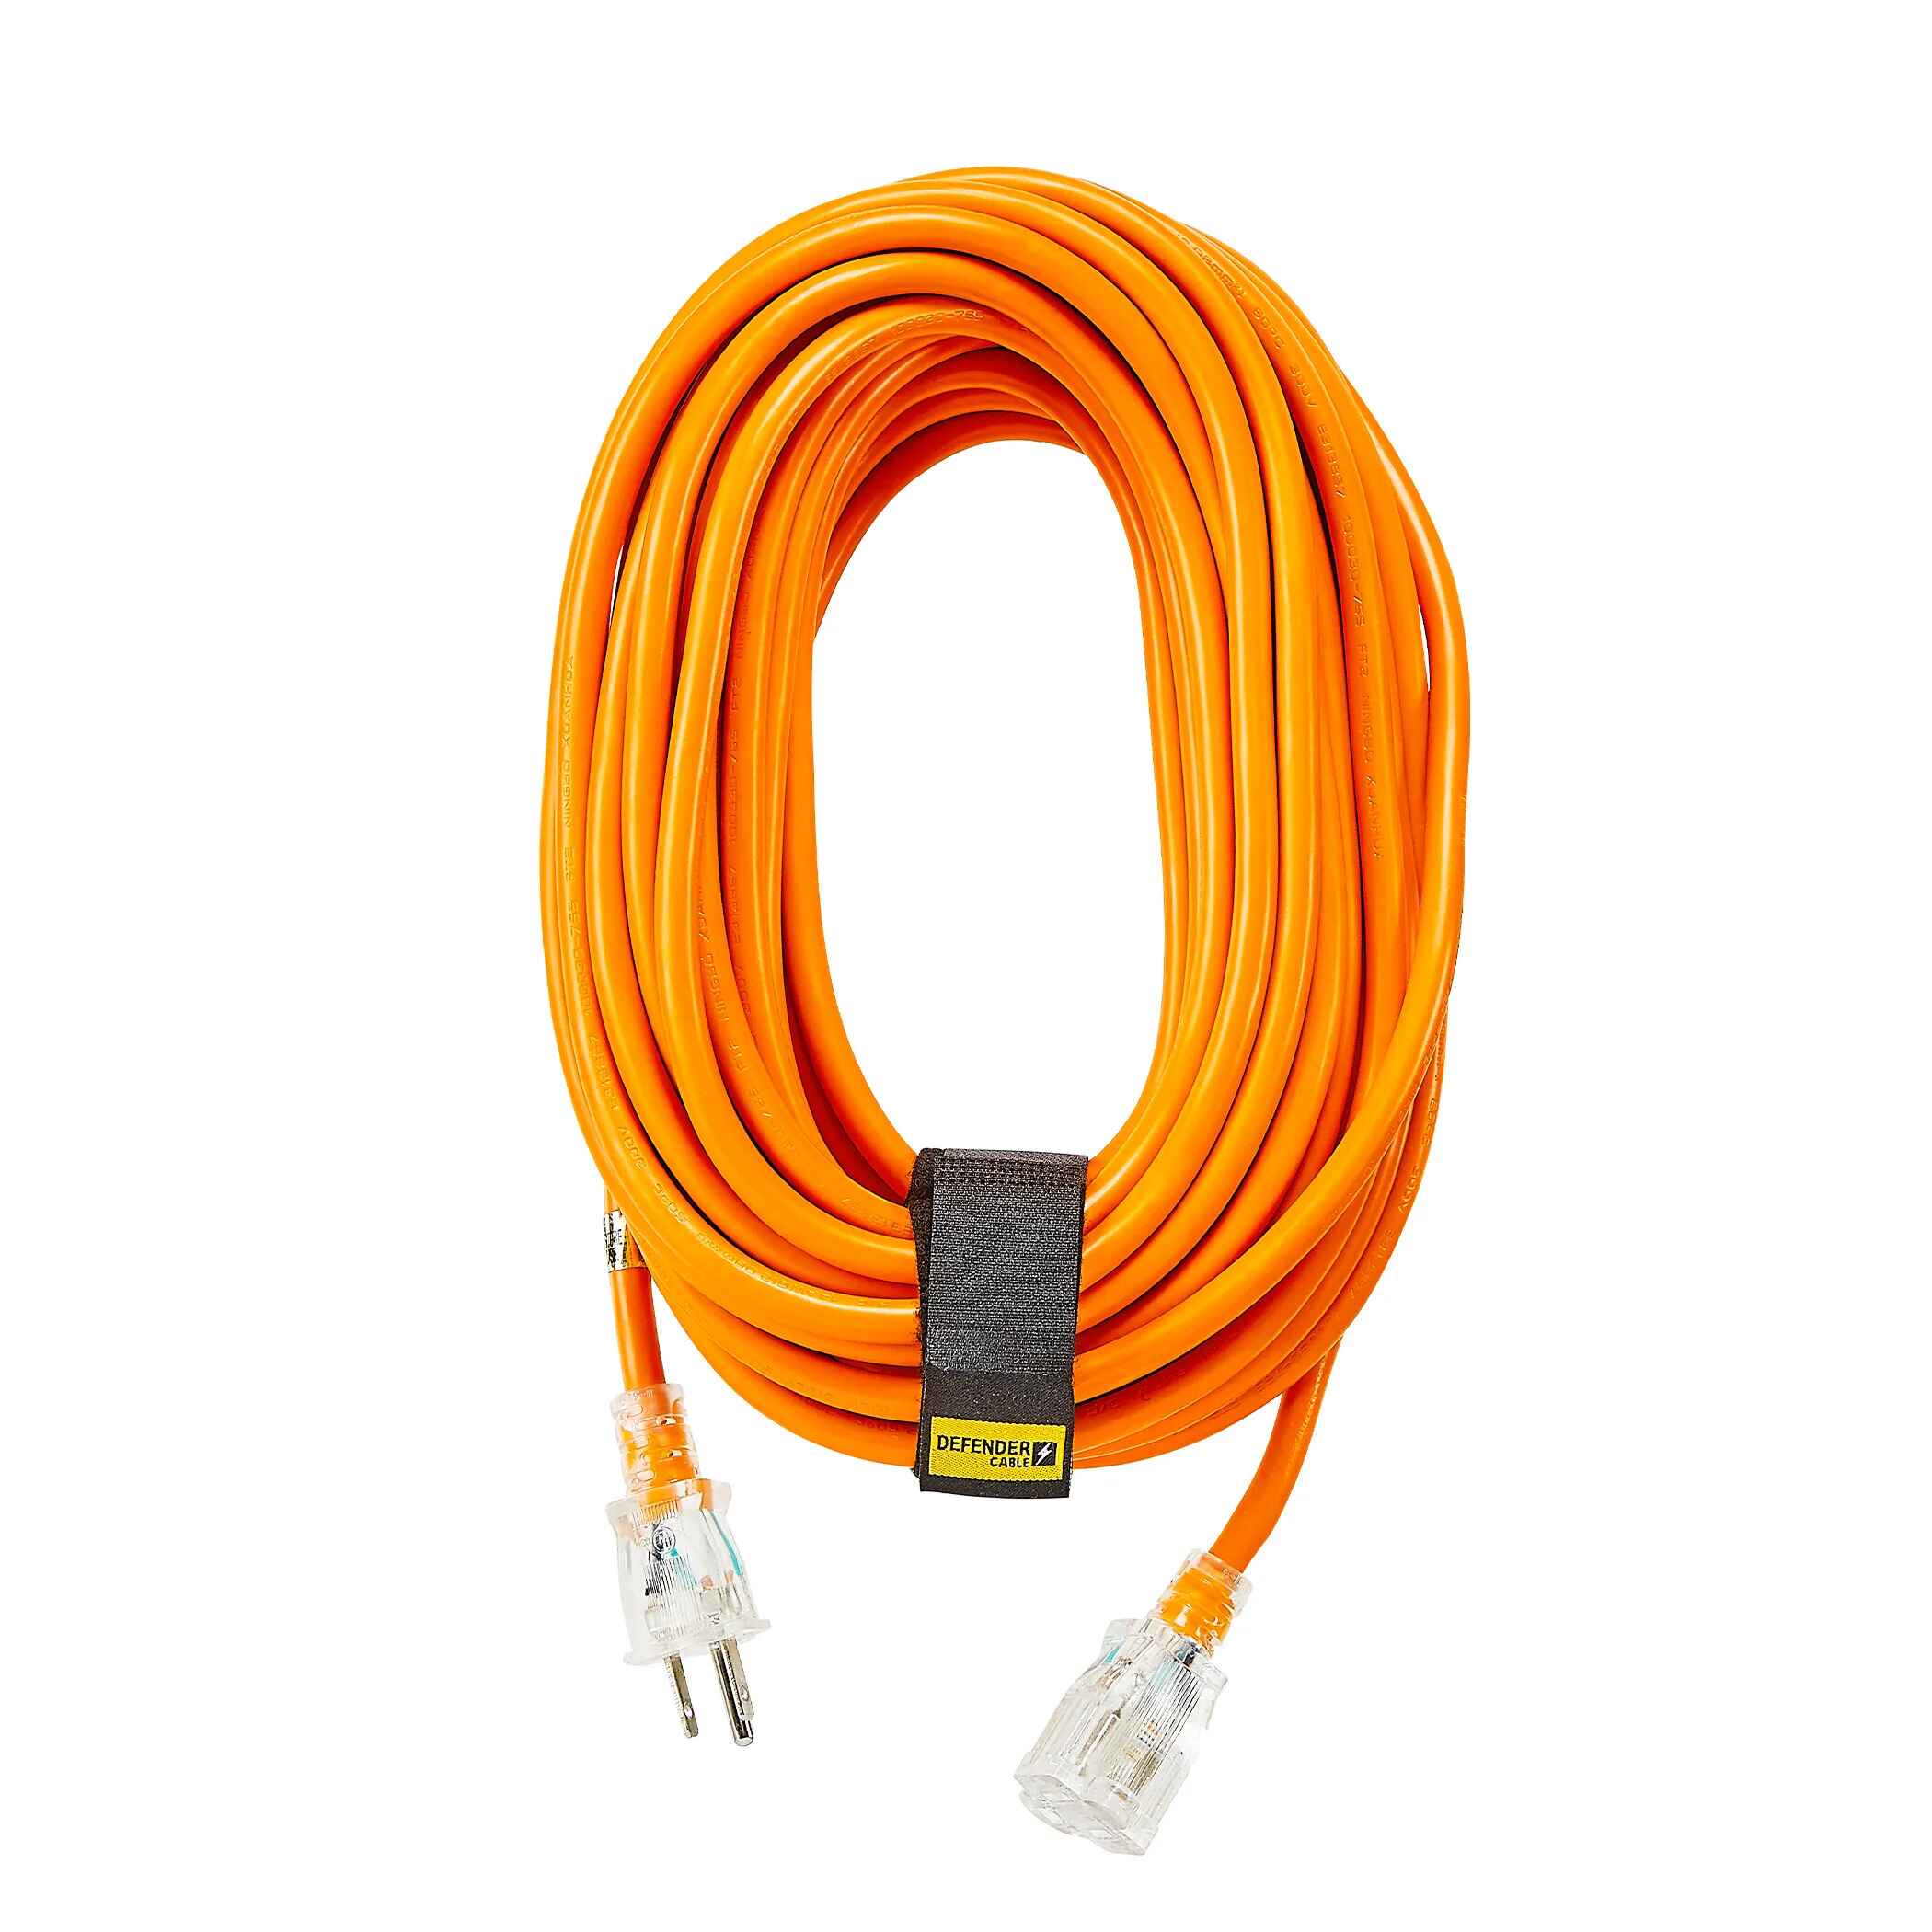 12/3 Gauge, 100 ft SJTW w/ Lighted End Contractor Grade Extension Cord